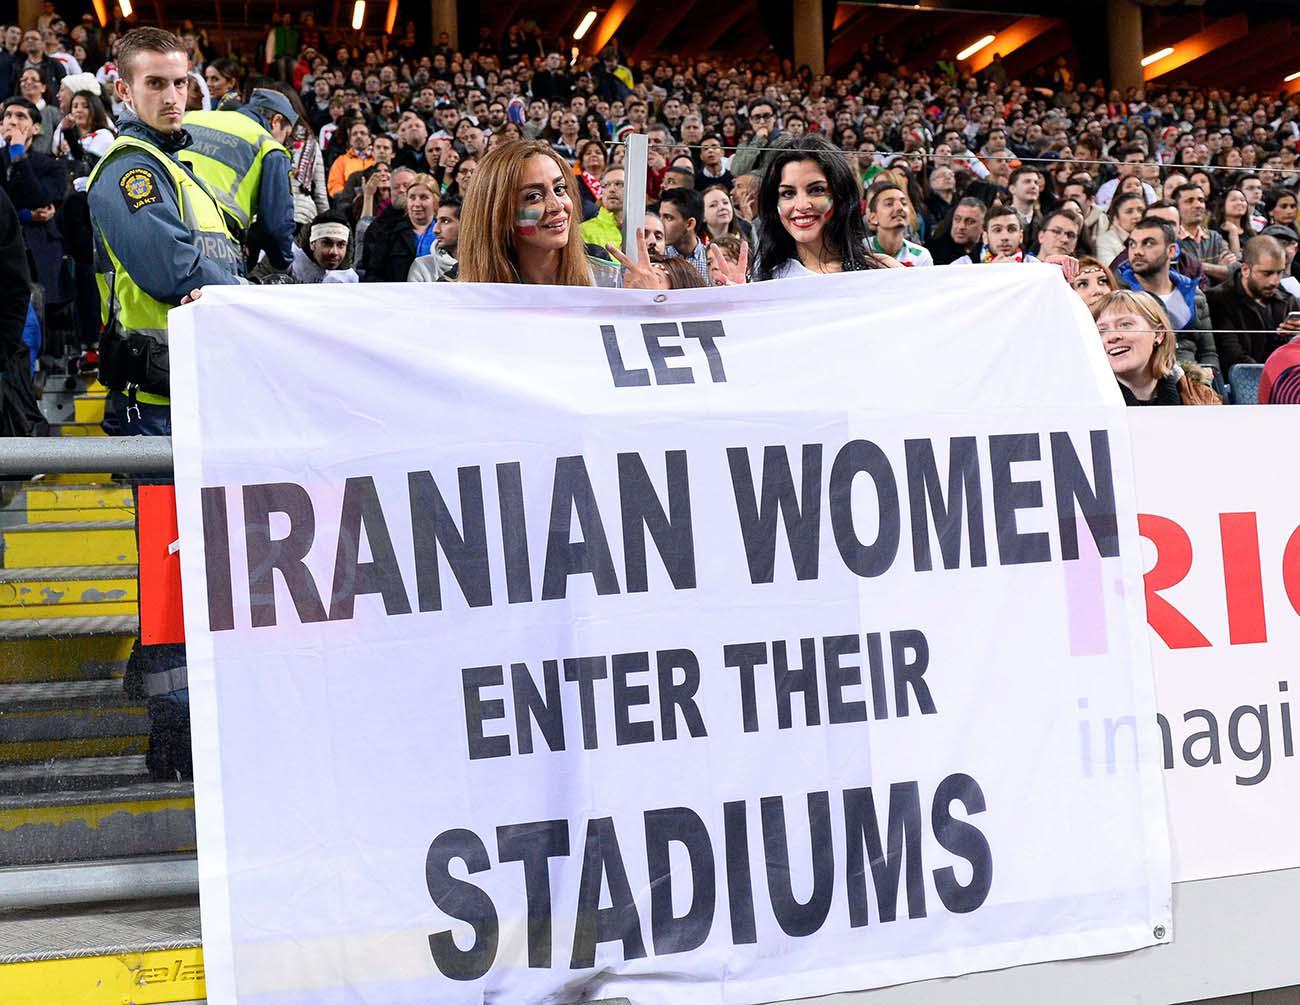 'Let Iranian women enter their stadiums', reads the banner